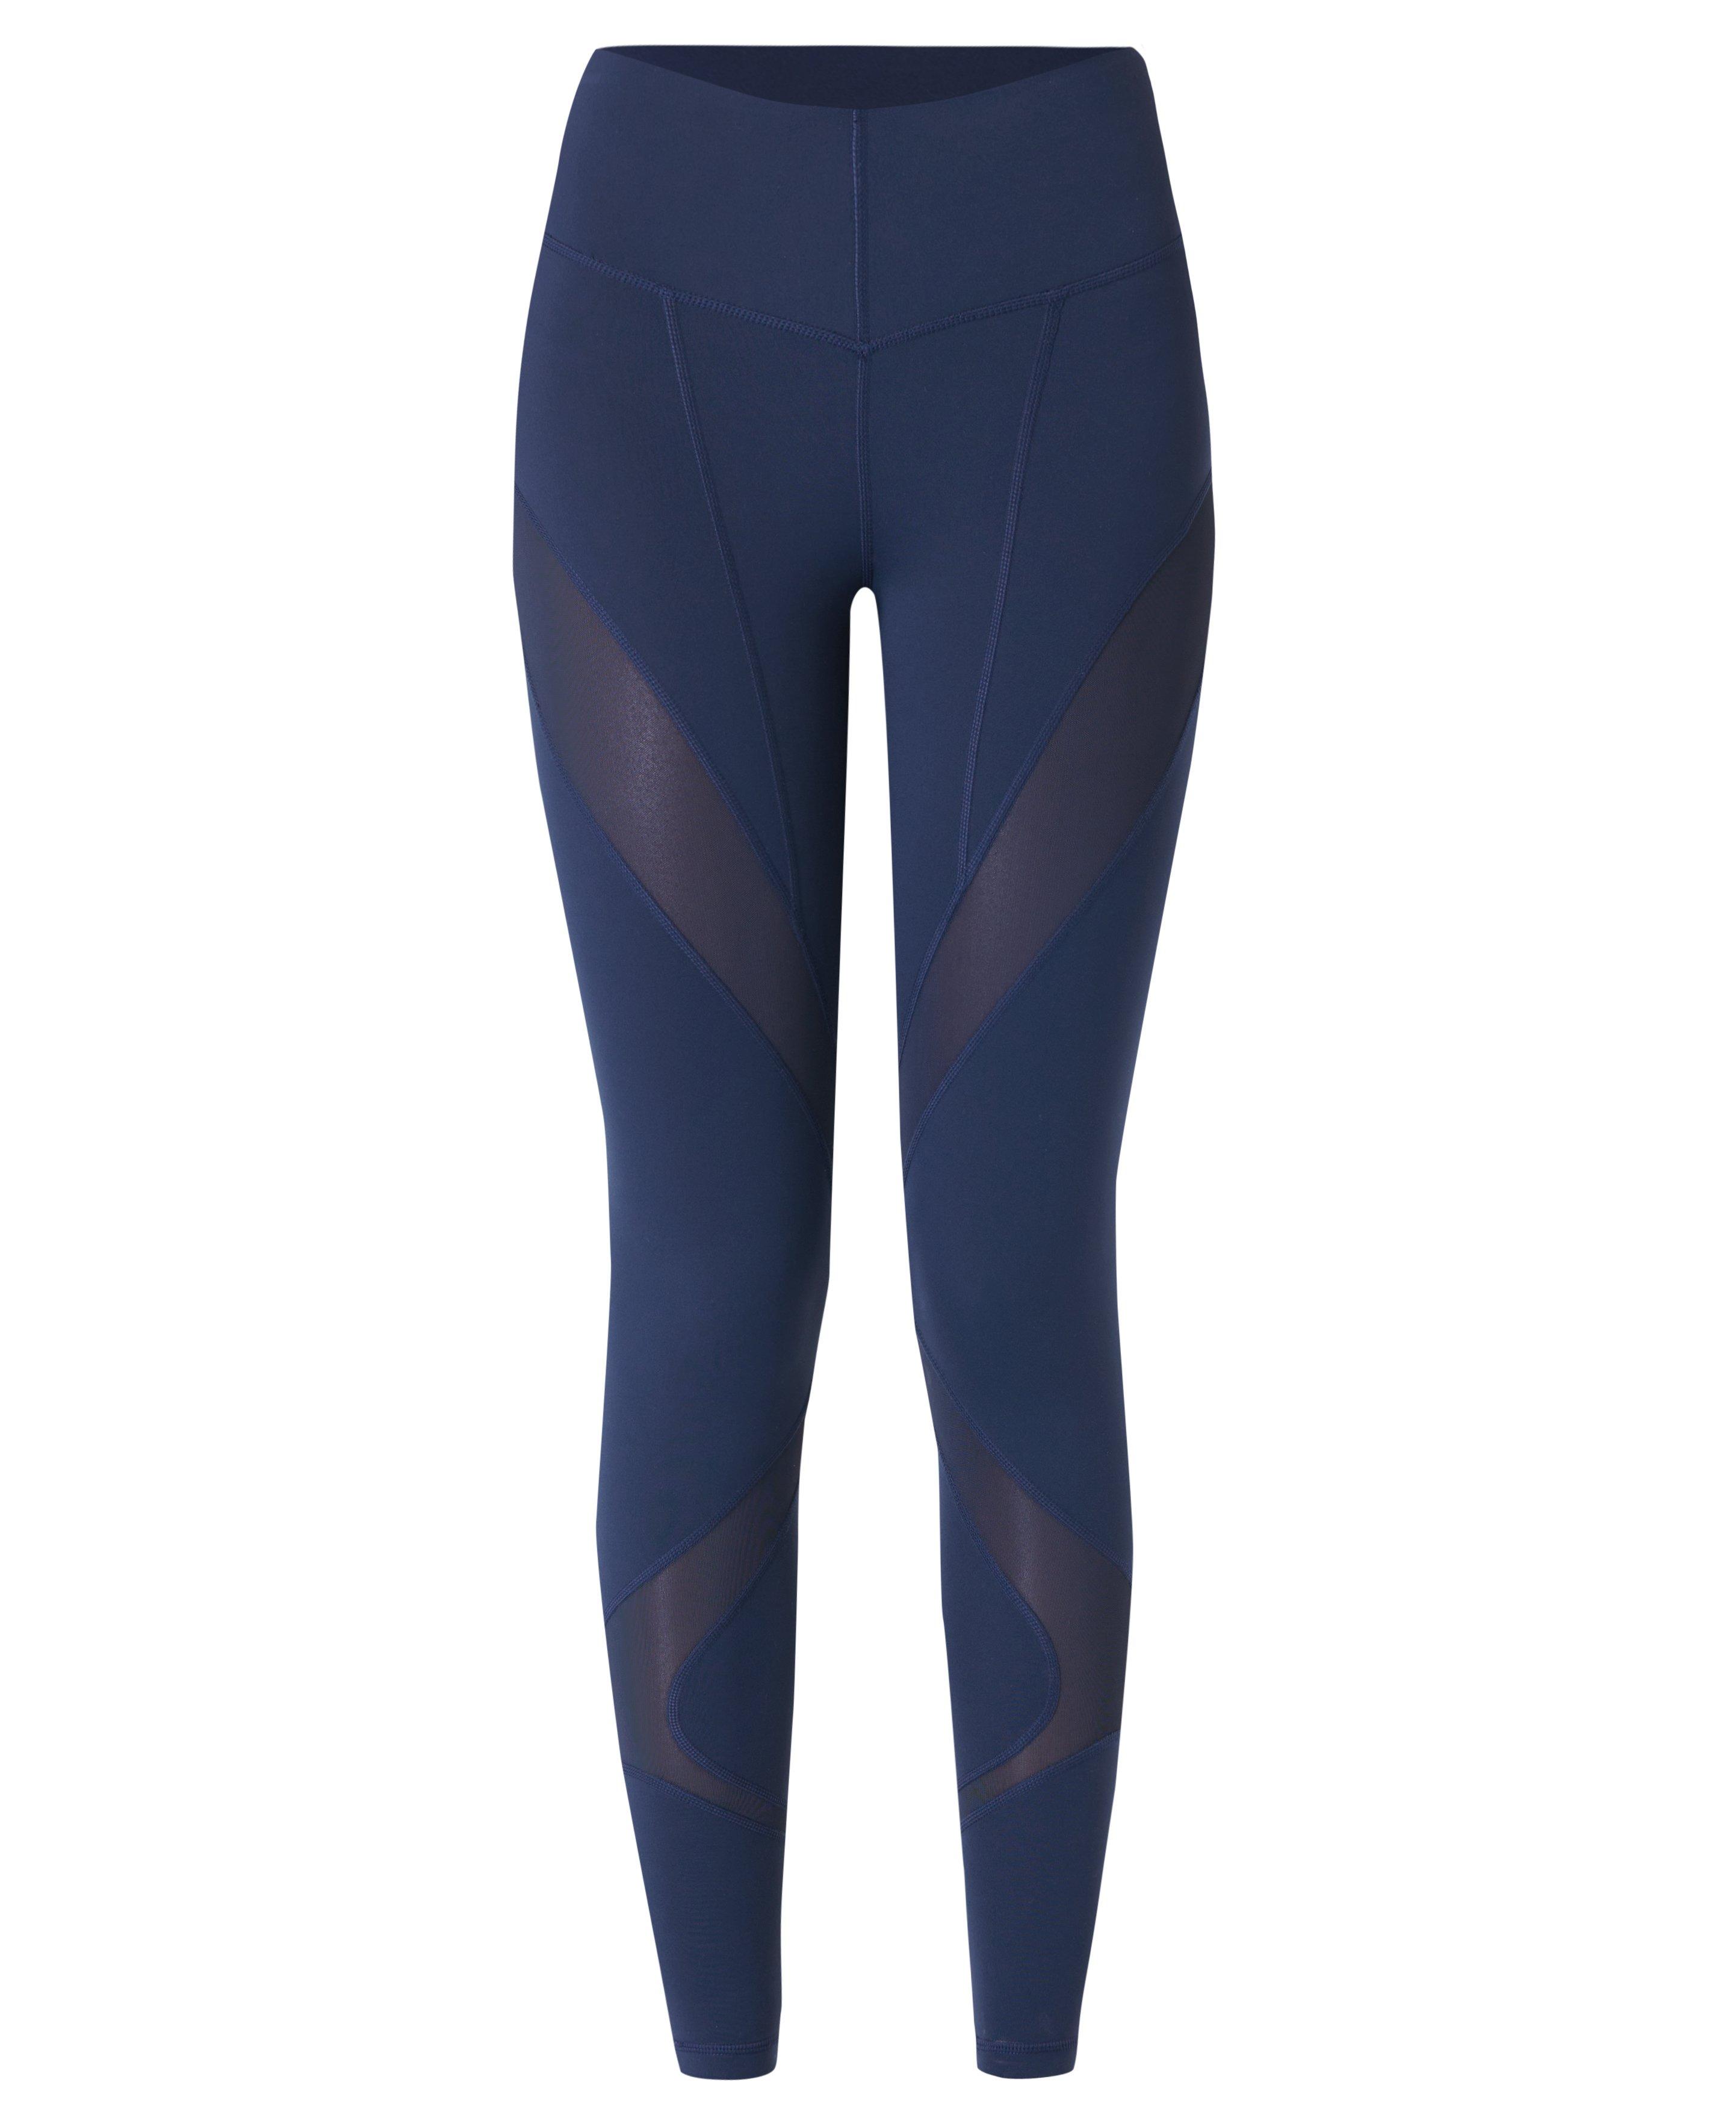 TYC 7/8 navy blue leggings with mesh stripes down front of legs. Size M